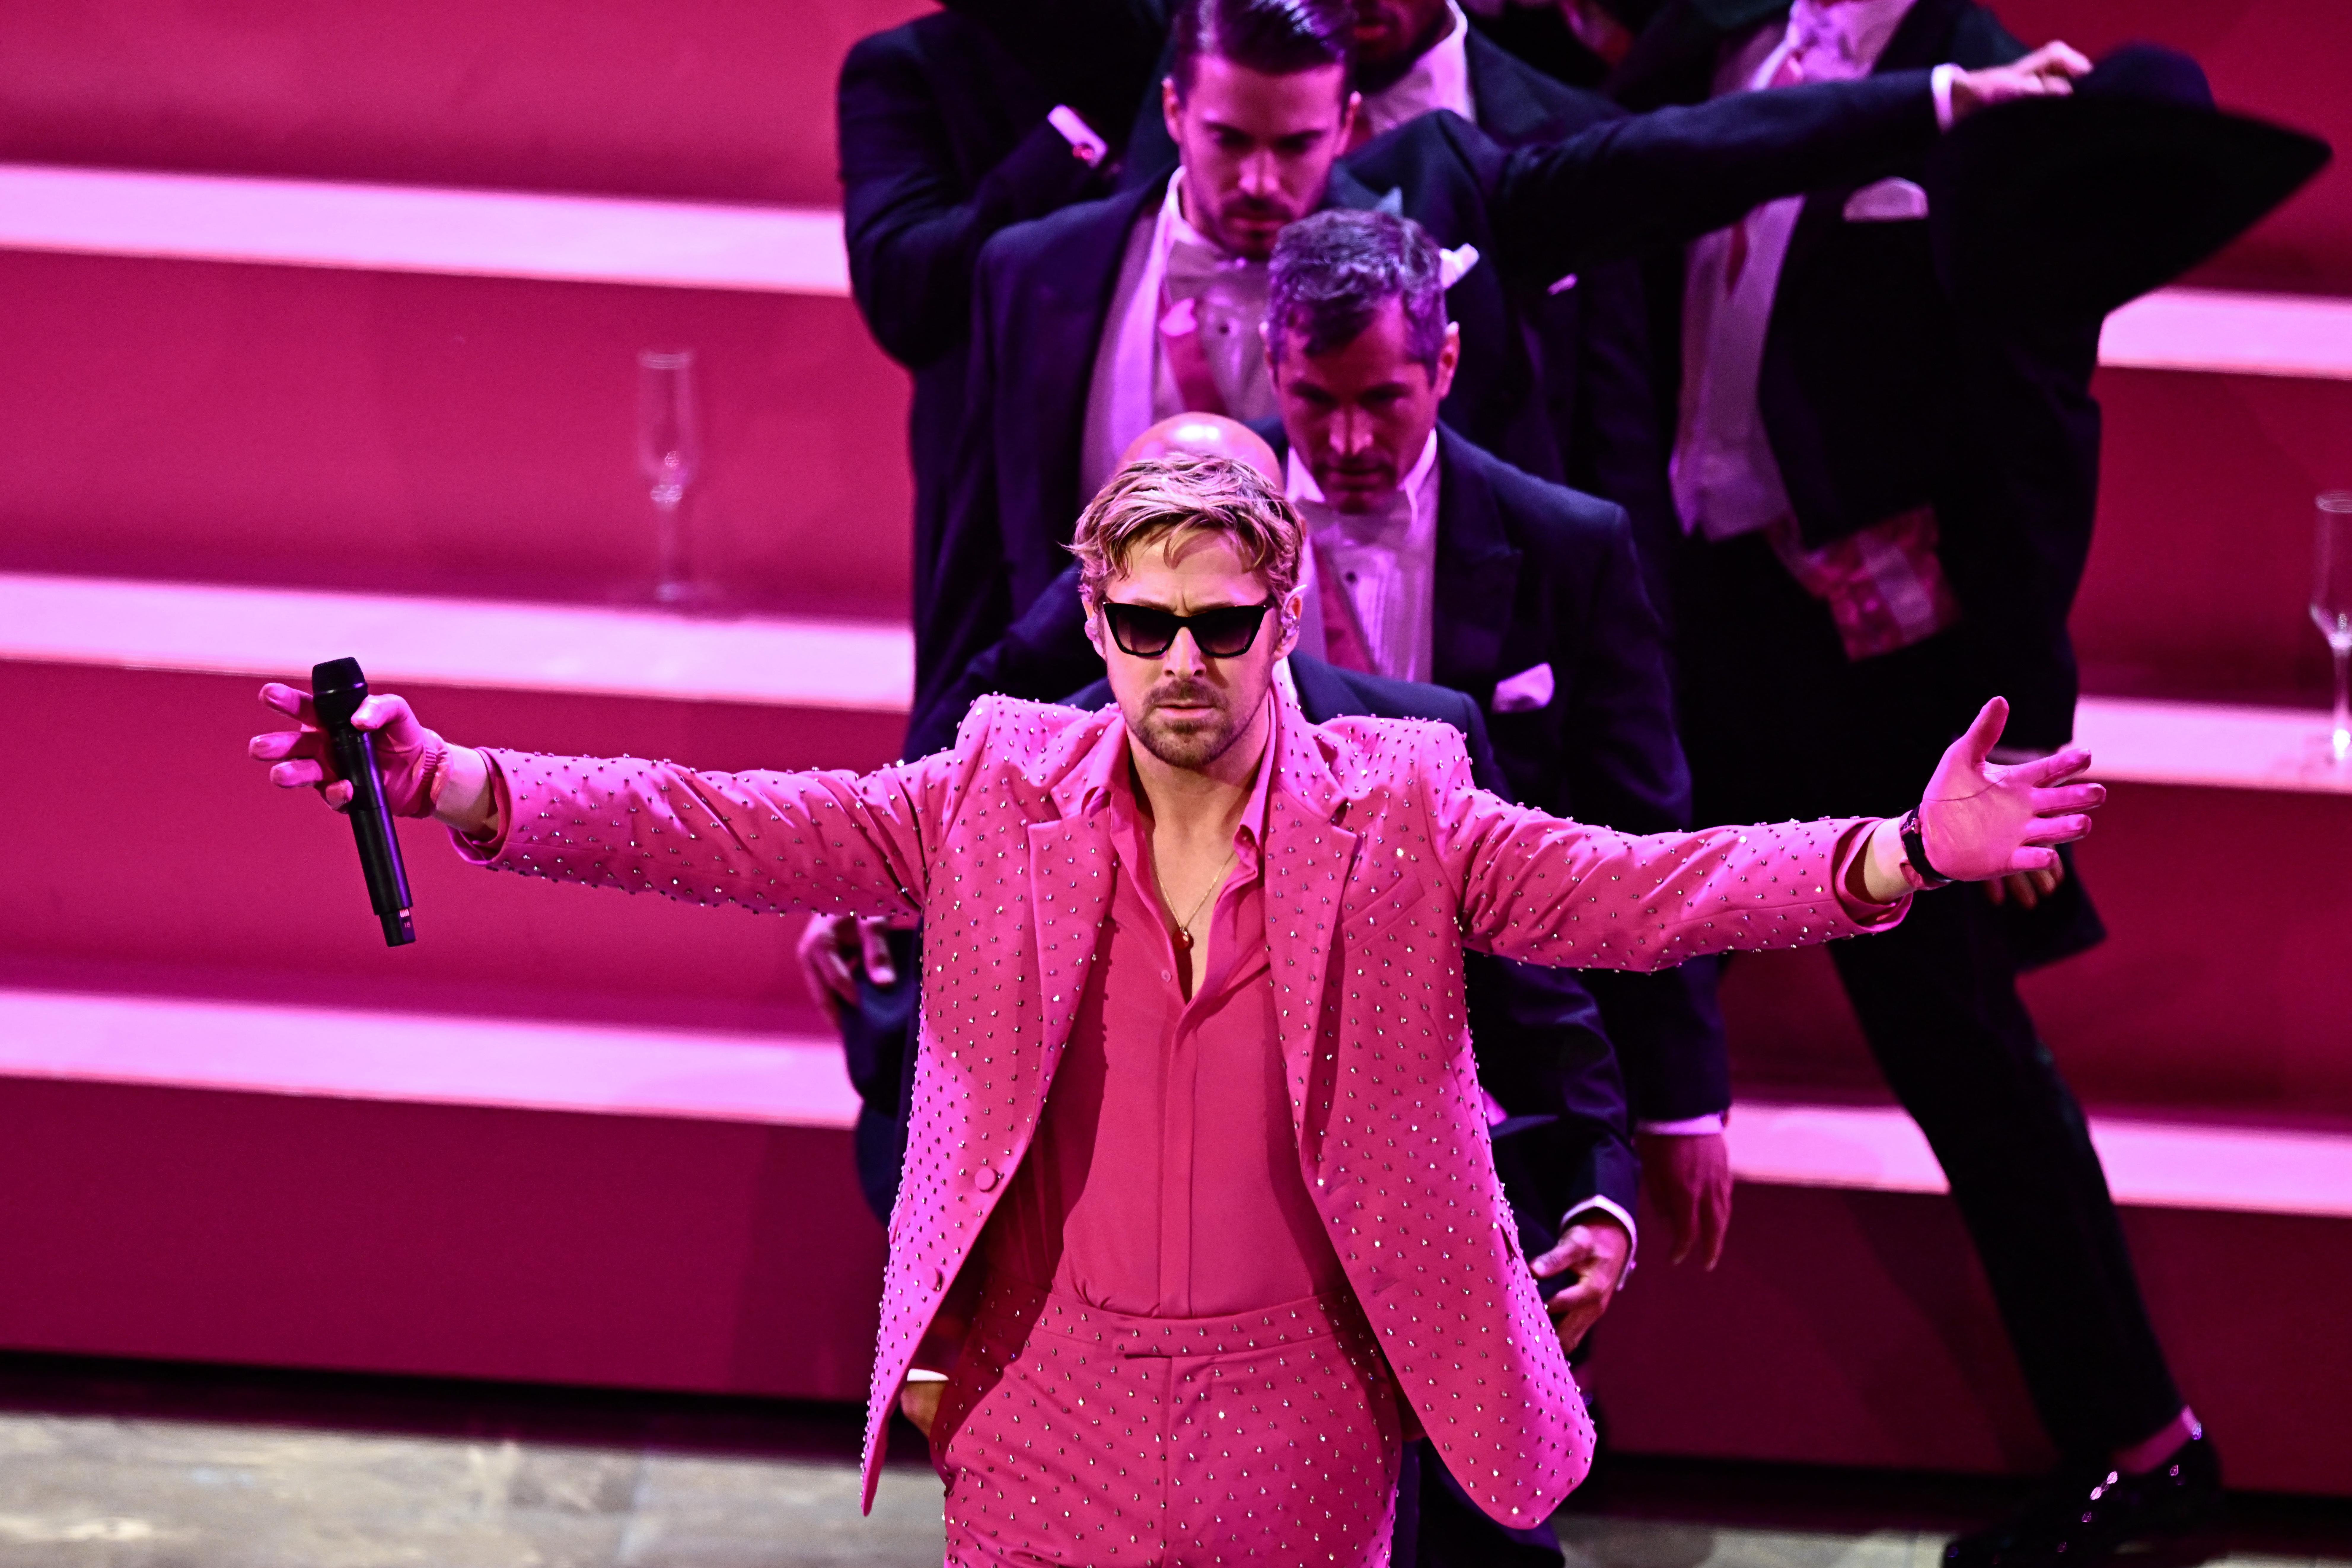 Ryan Gosling brought his Kenergy in full force at the Oscars 2024. The 'Barbie' star looked gorgeous in the bedazzled pink suit for epic 'I'm Just Ken' performance